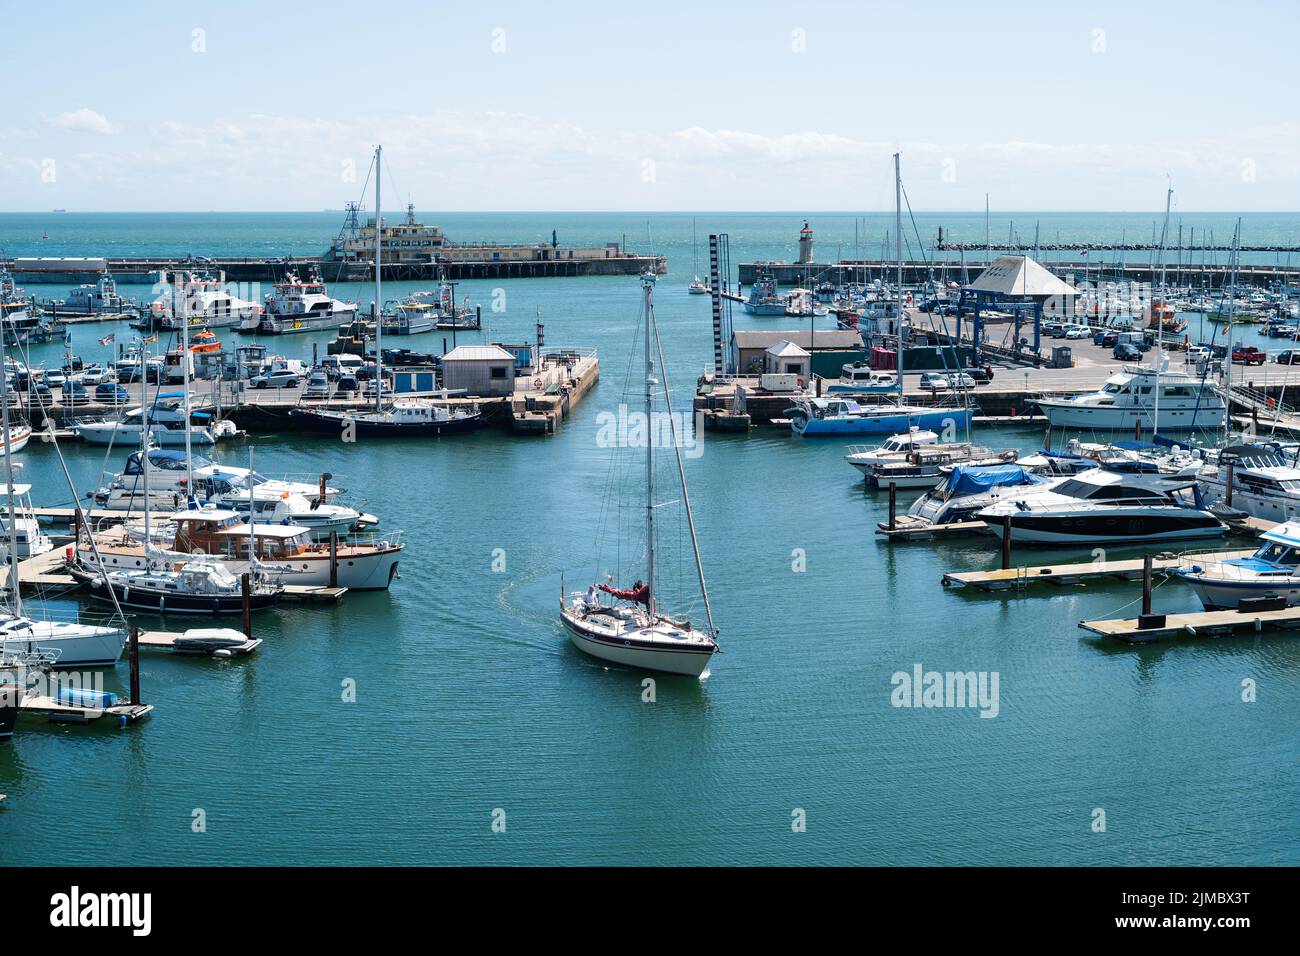 Ramsgate, UK - June 28 2022 A yacht with its sail down enters Ramsgate Royal Harbour inner basin. Stock Photo